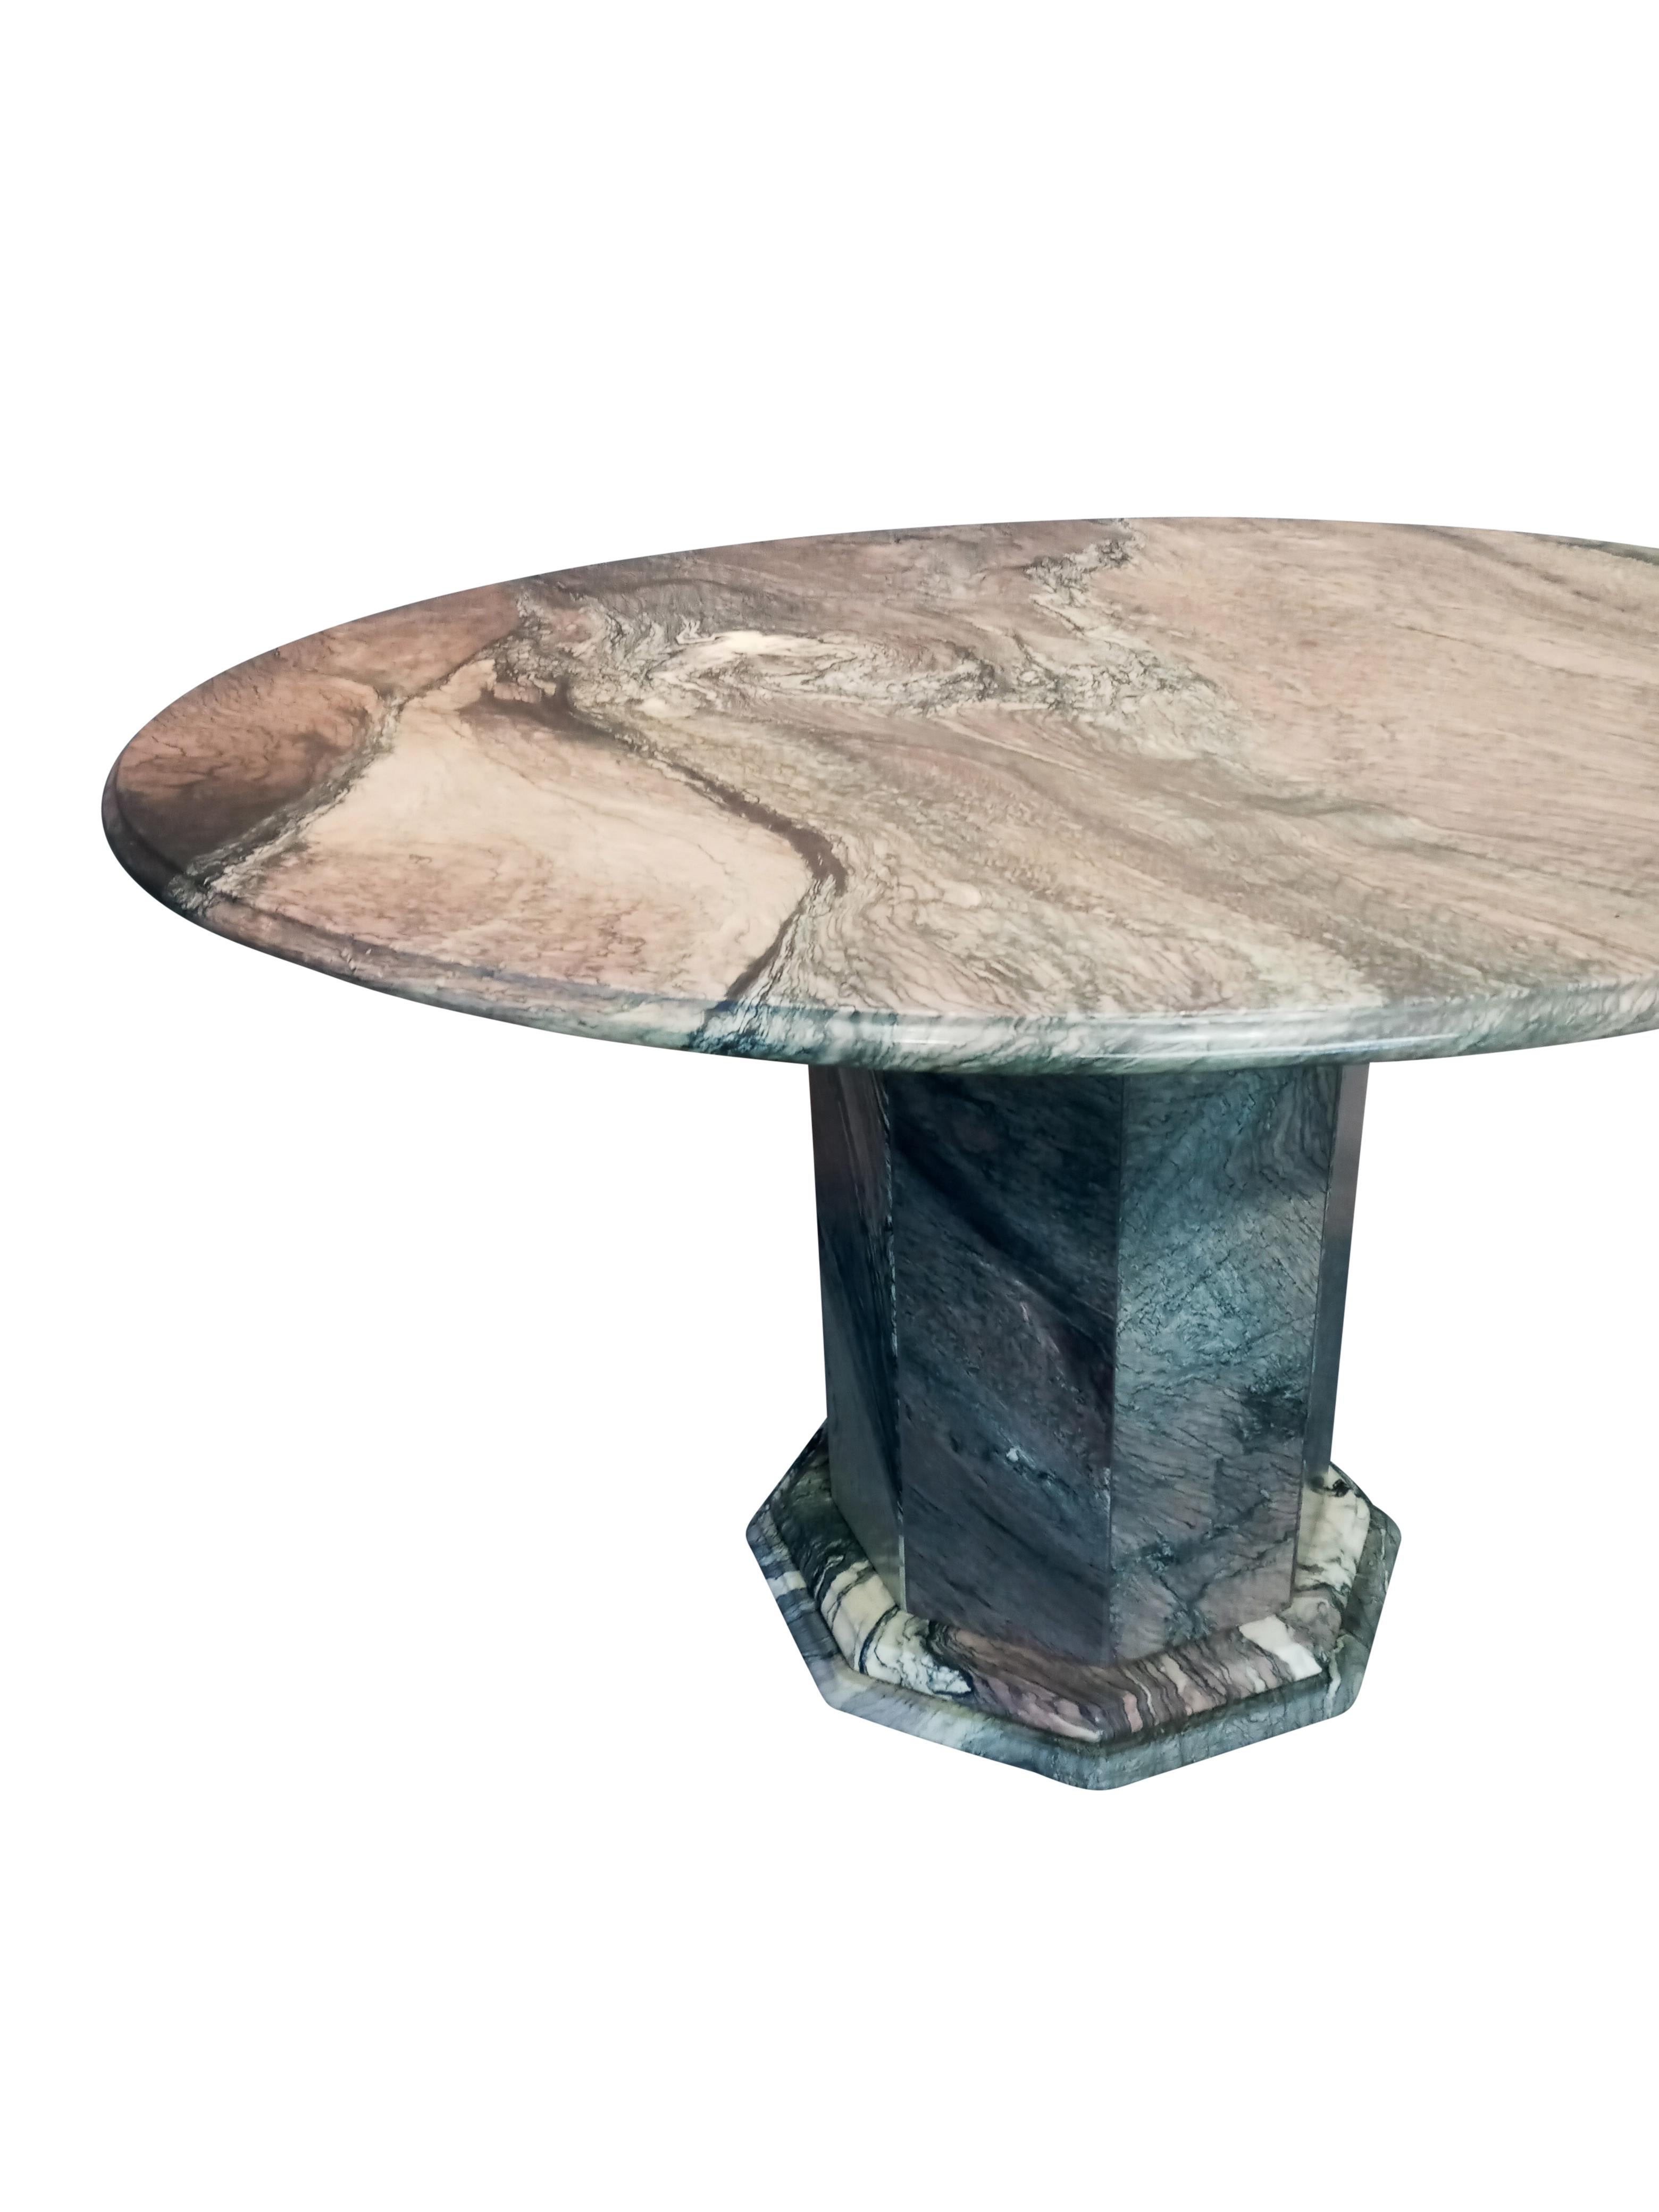 Attractive vintage Cipollino Ondulato marble dining table, designed and manufactured in Italy. This table has a strong design with rich veining accentuating the highest quality of marble. Features a generous round top where you can appreciate the